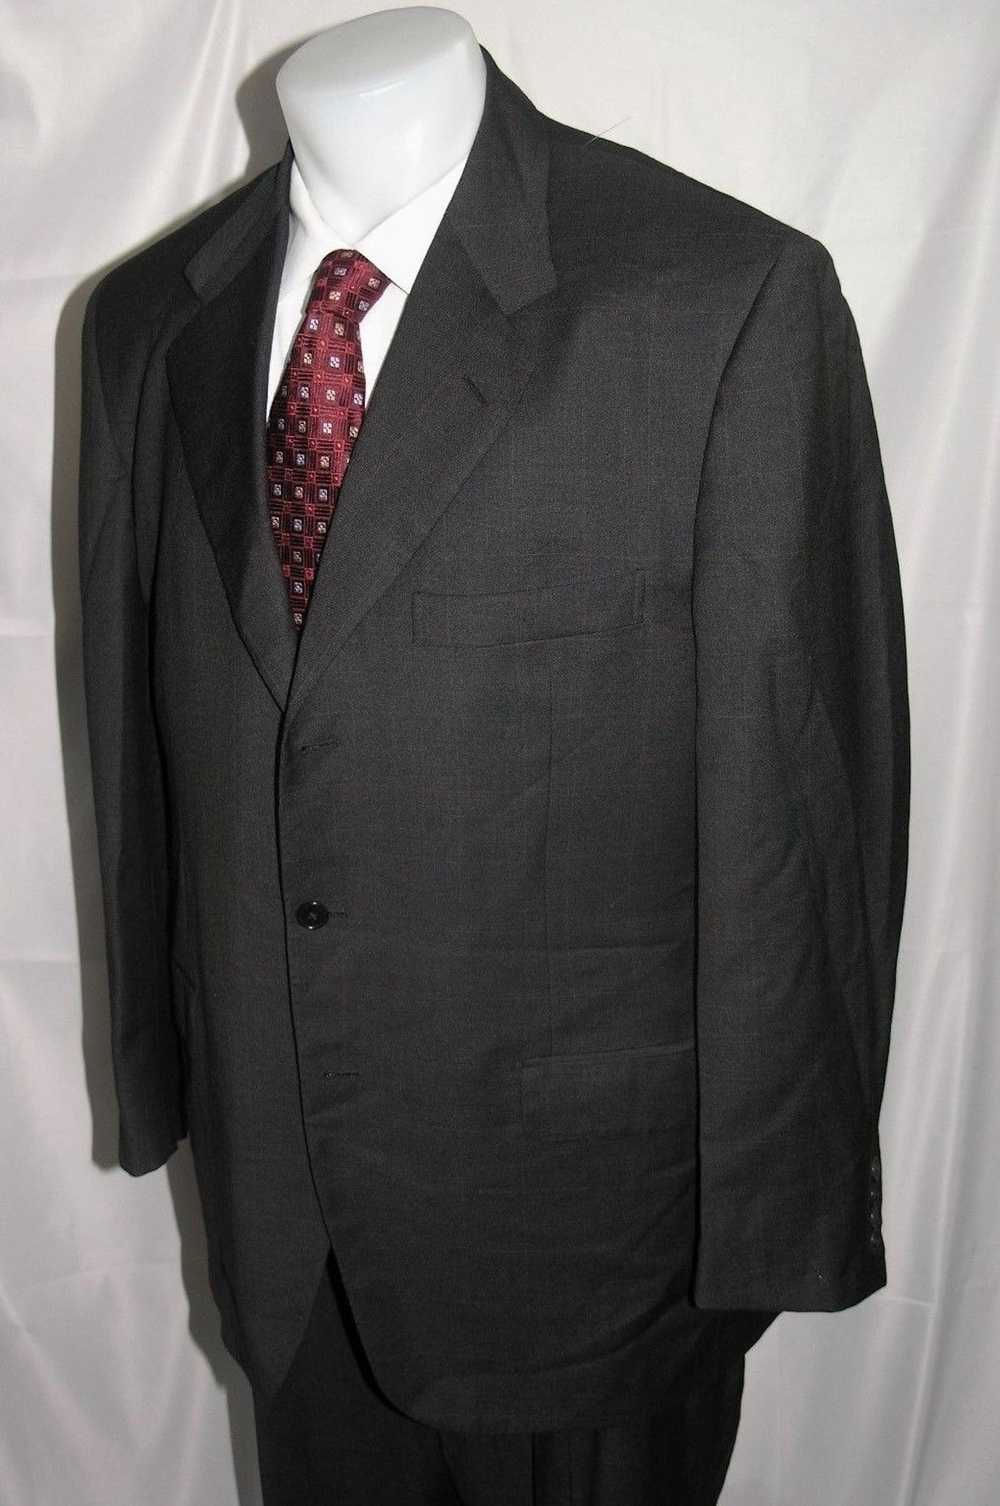 Davenza Roma Hand Tailored Three Button Suit 46L - image 6